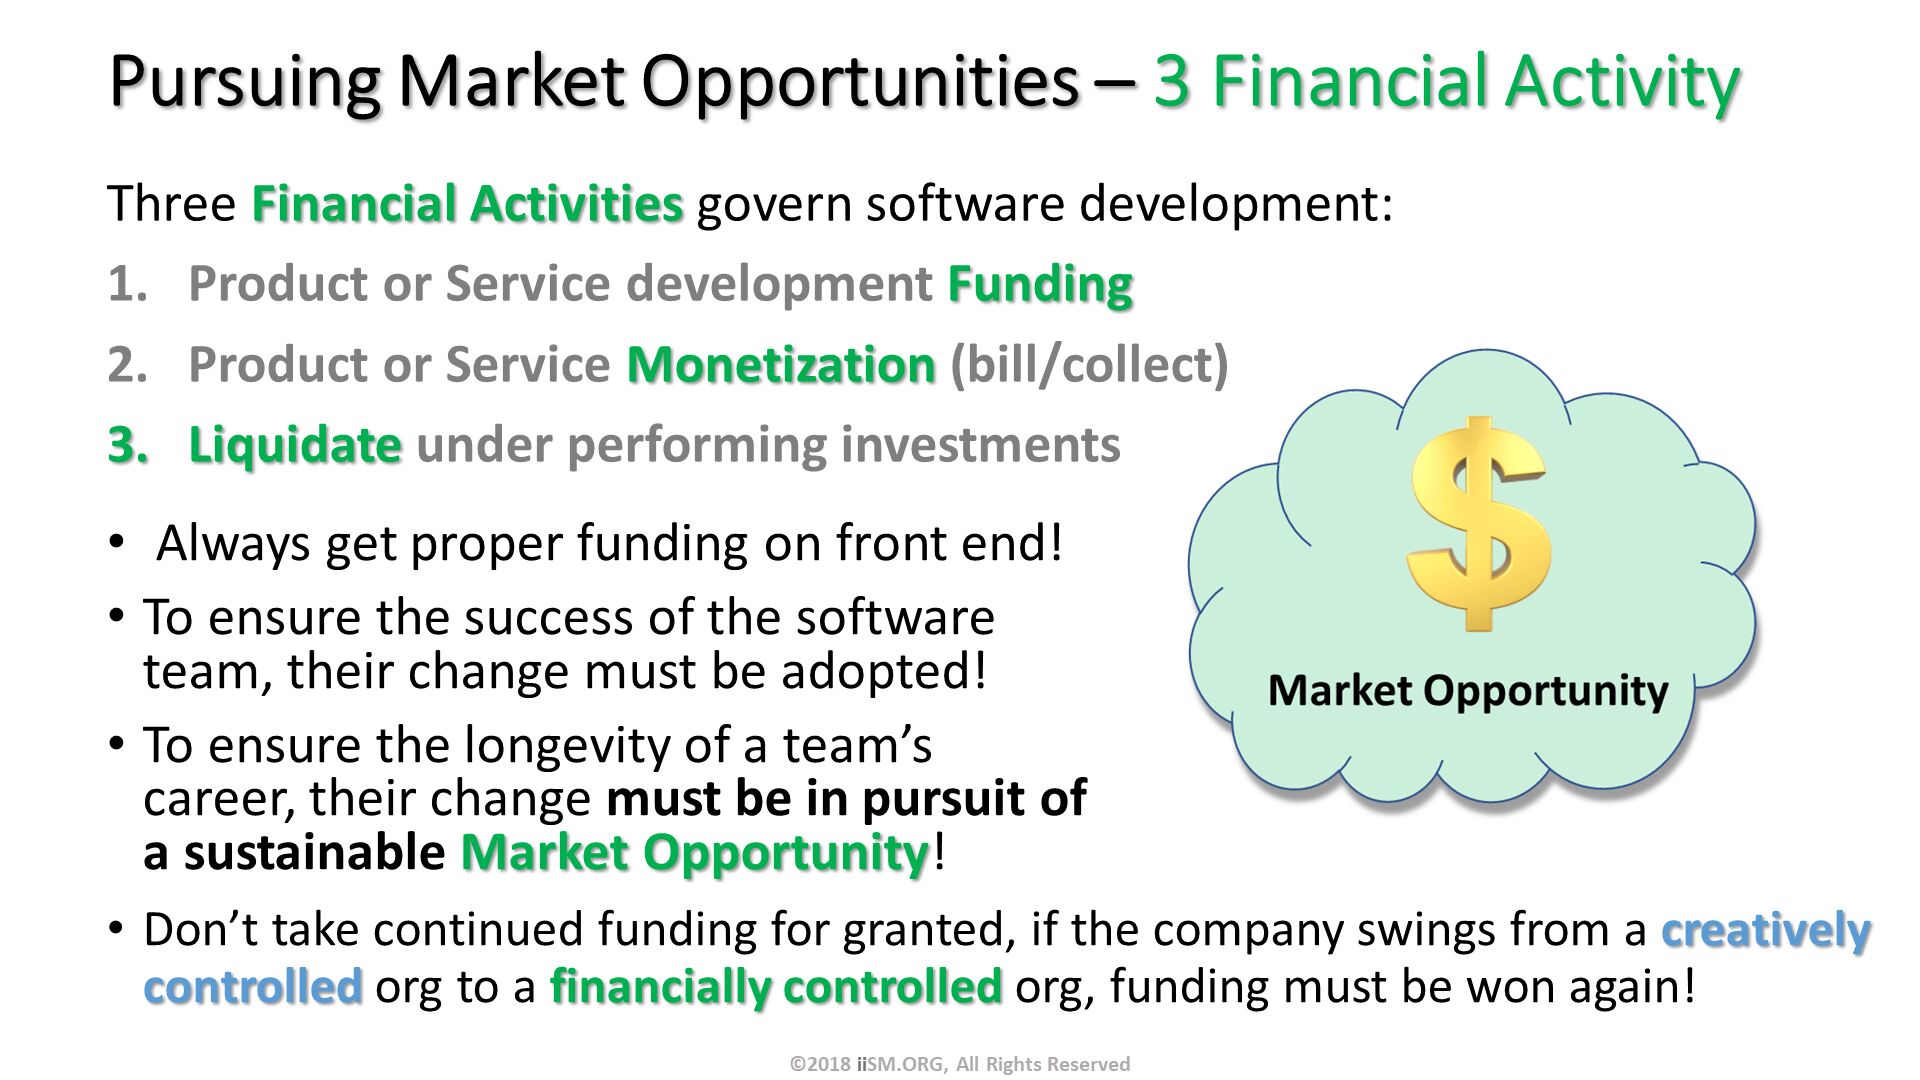 Pursuing Market Opportunities – 3 Financial Activity. Three Financial Activities govern software development:
Product or Service development Funding
Product or Service Monetization (bill/collect)
Liquidate under performing investments.  Always get proper funding on front end!
To ensure the success of the software team, their change must be adopted! 
To ensure the longevity of a team’s career, their change must be in pursuit of a sustainable Market Opportunity!

. Don’t take continued funding for granted, if the company swings from a creatively controlled org to a financially controlled org, funding must be won again!
. ©2018 iiSM.ORG, All Rights Reserved. 